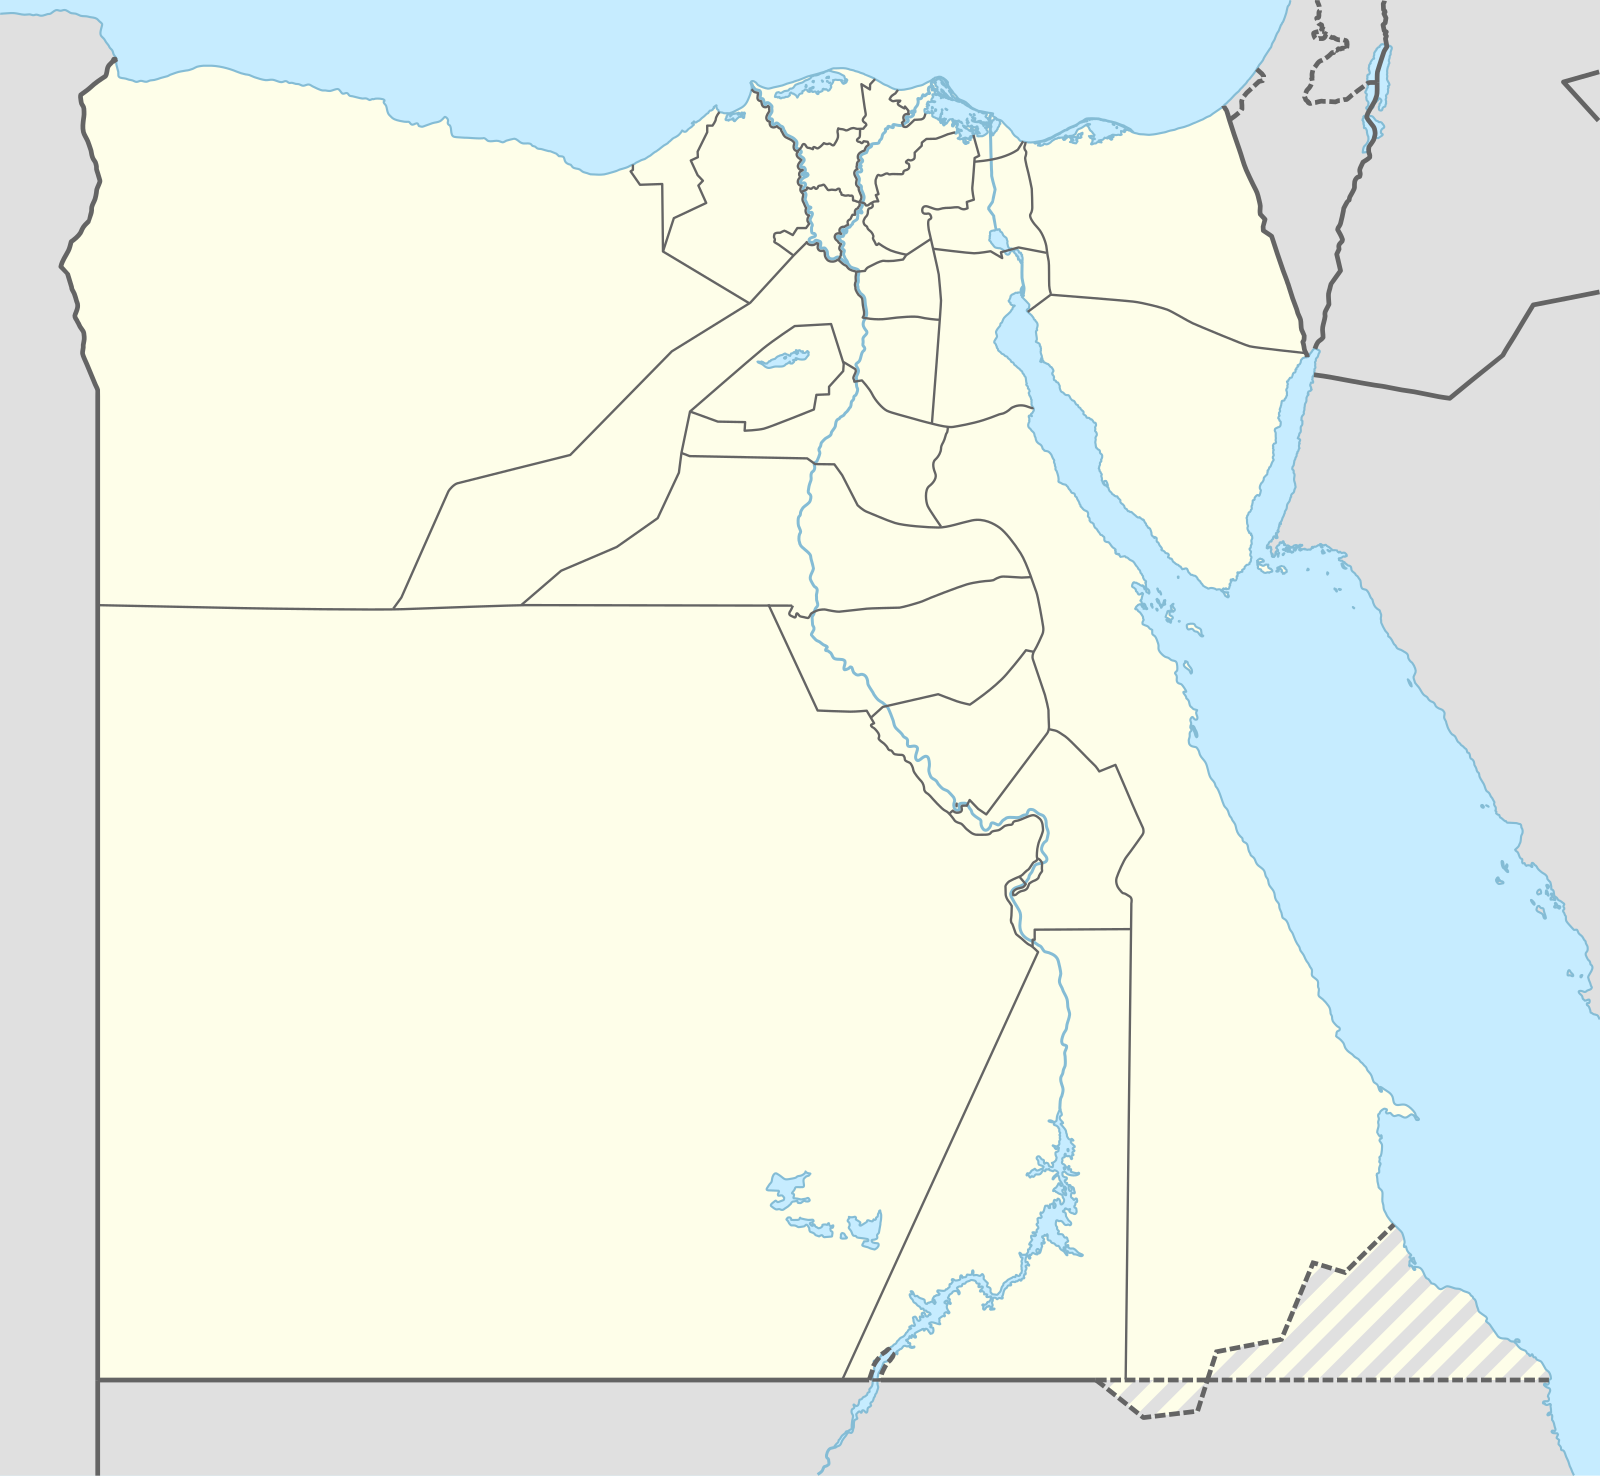 Egyptian insurgency detailed map is located in Egypt